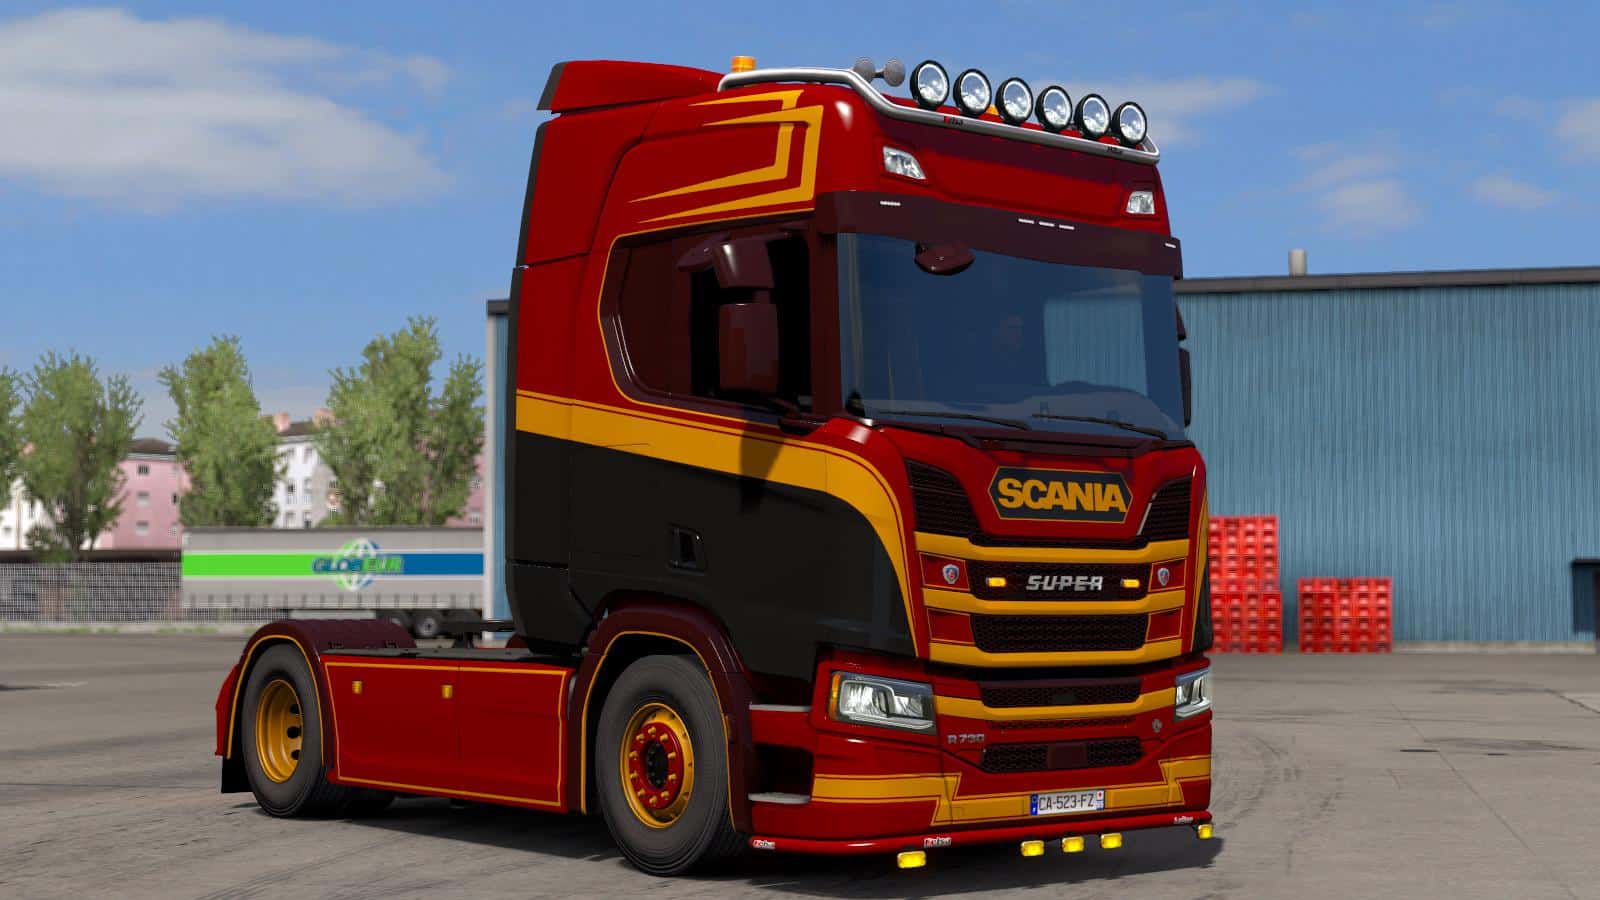 SCANIA R 2016 HOLLAND STYLE COLORED SKIN 1.36.X TRUCK SKIN - ETS2 Mod